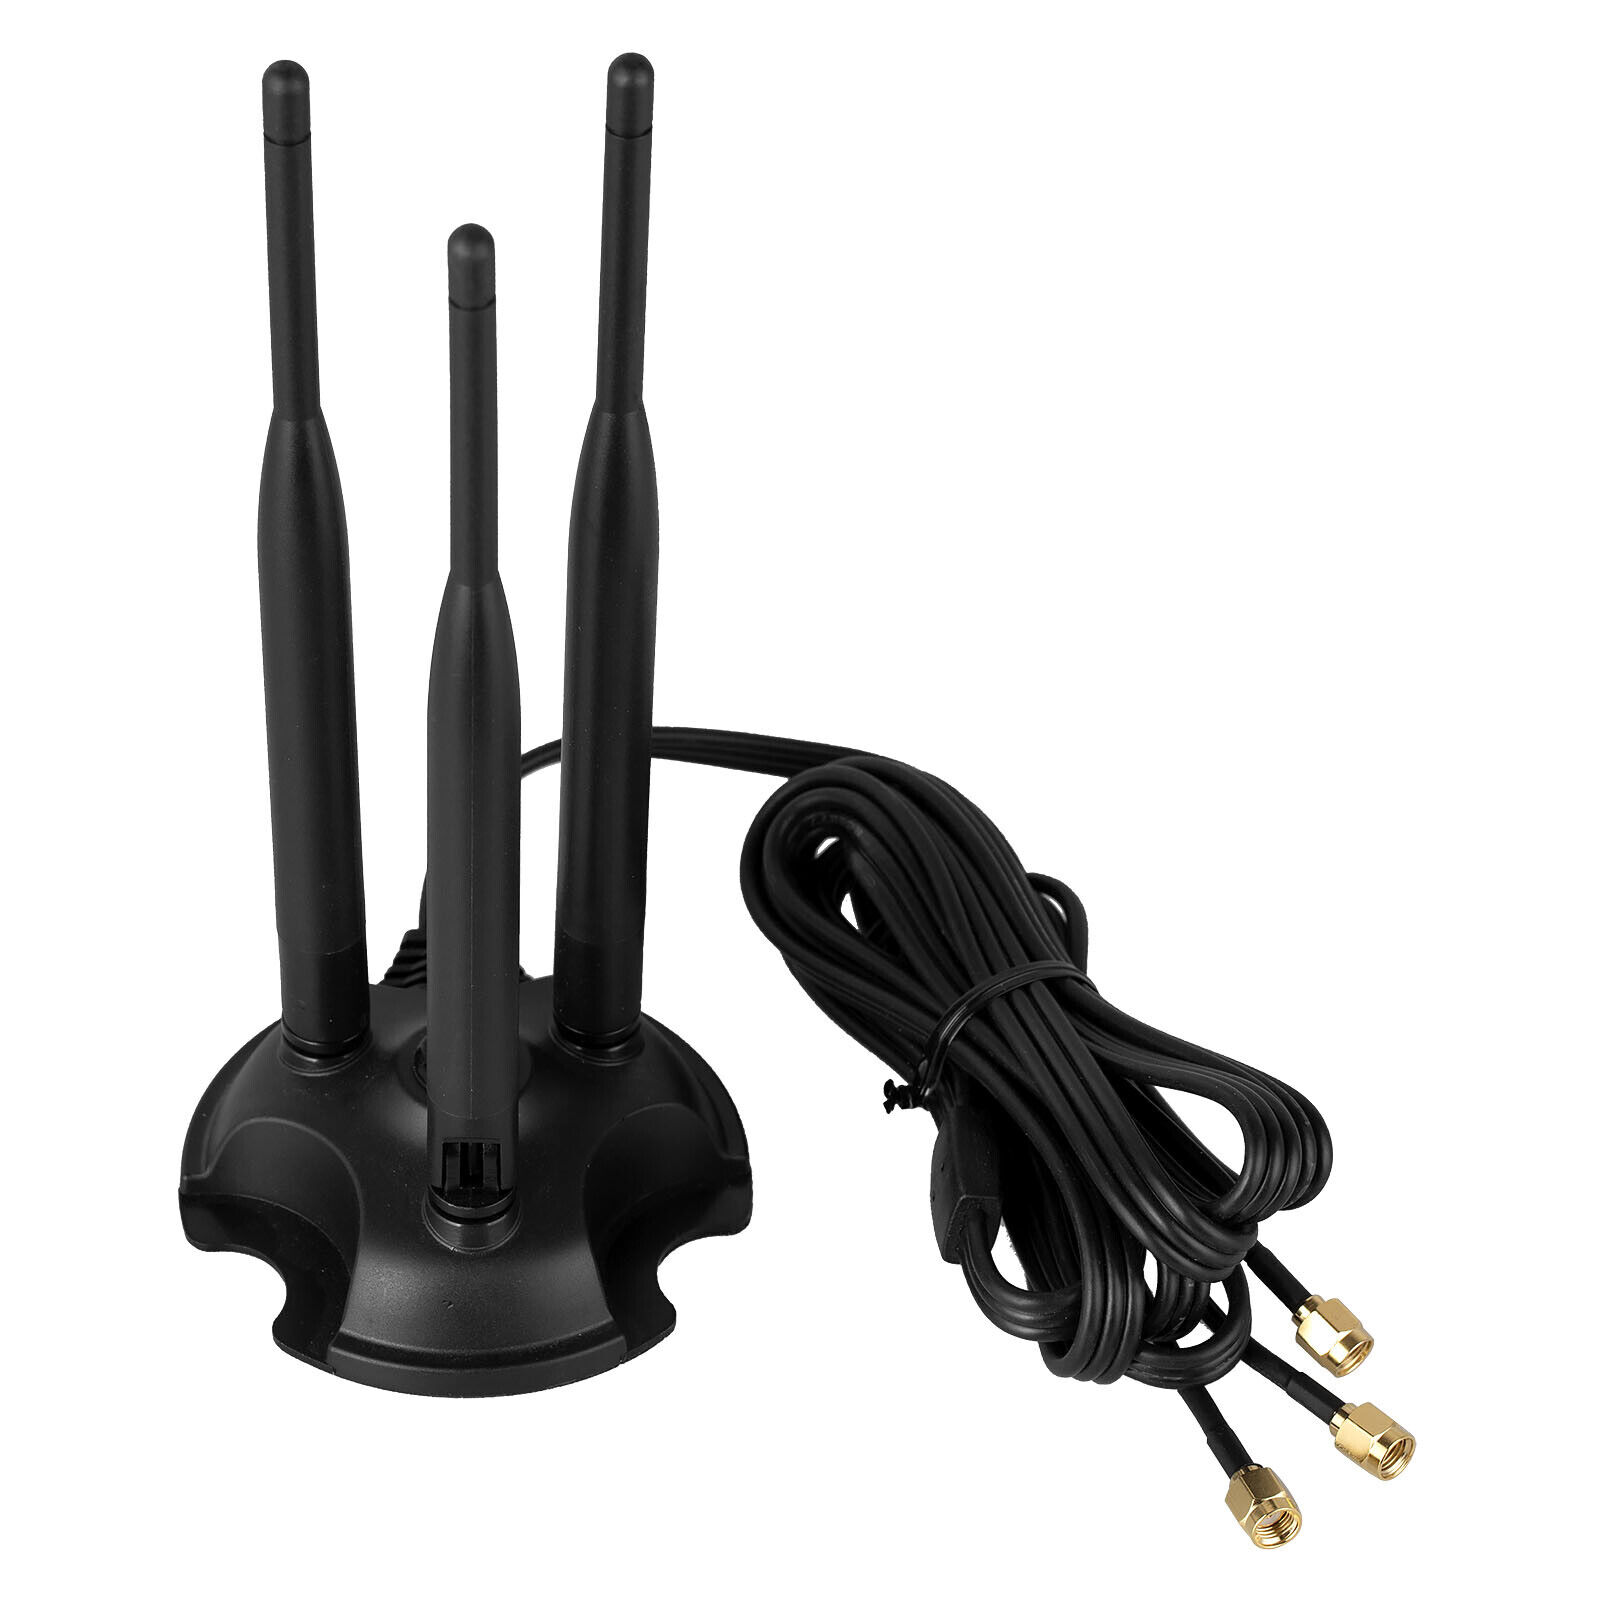 PC Triple WiFi Antenna 6dBi Wireless Omni Directional RP-SMA Extension Cable